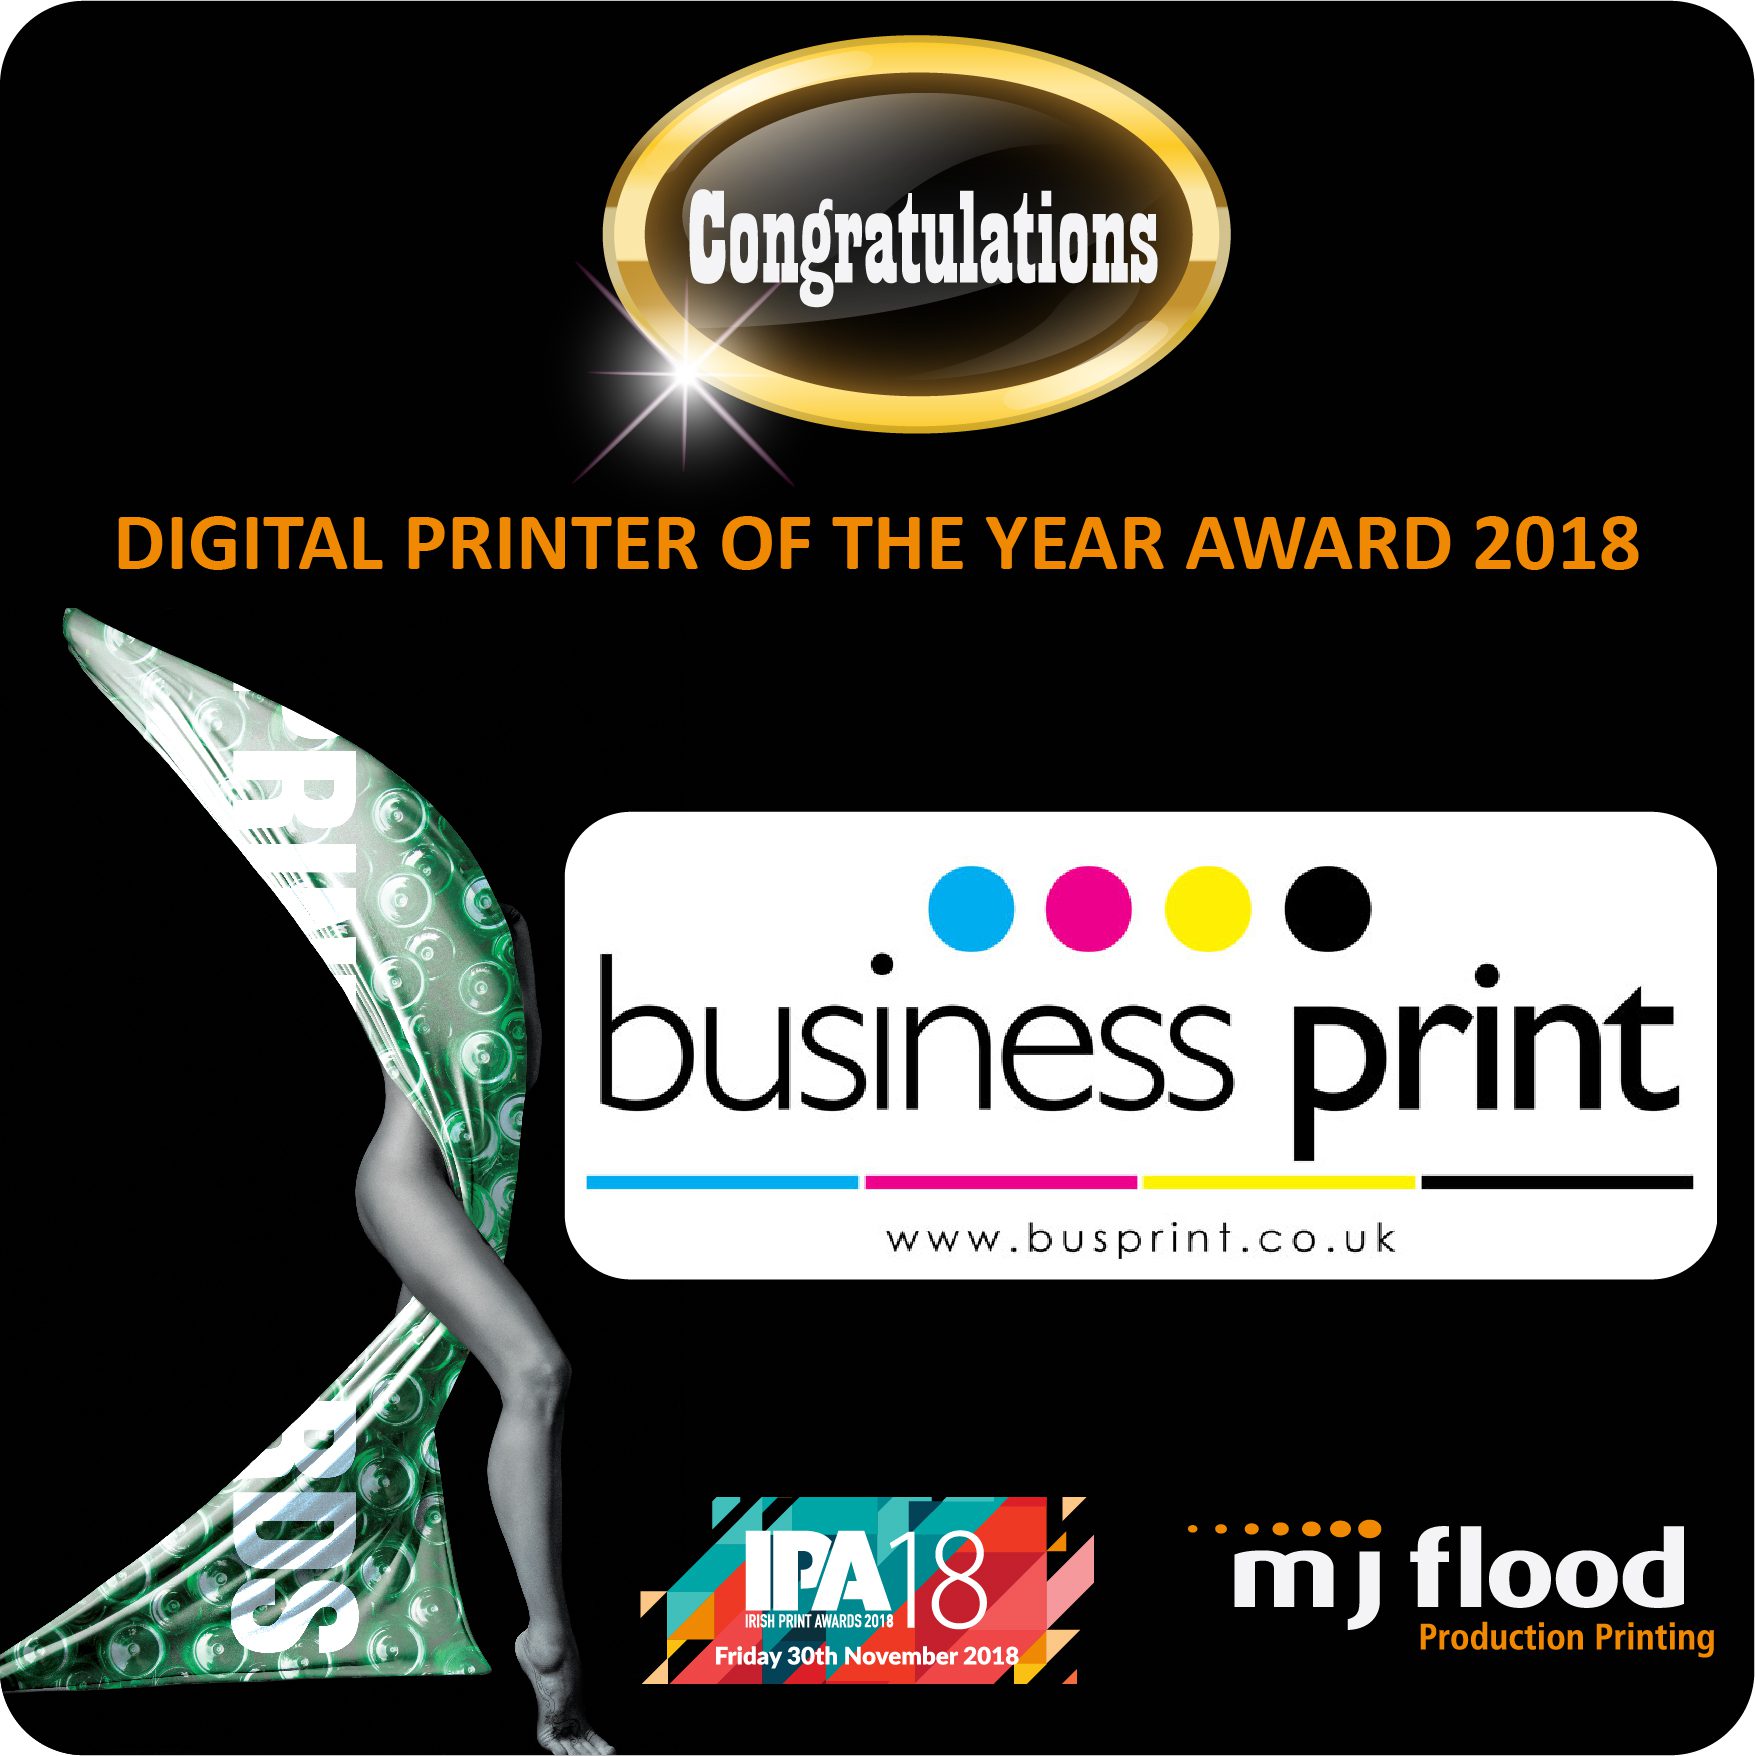 Digital Printer of the Year Awarded to Business Print Limited